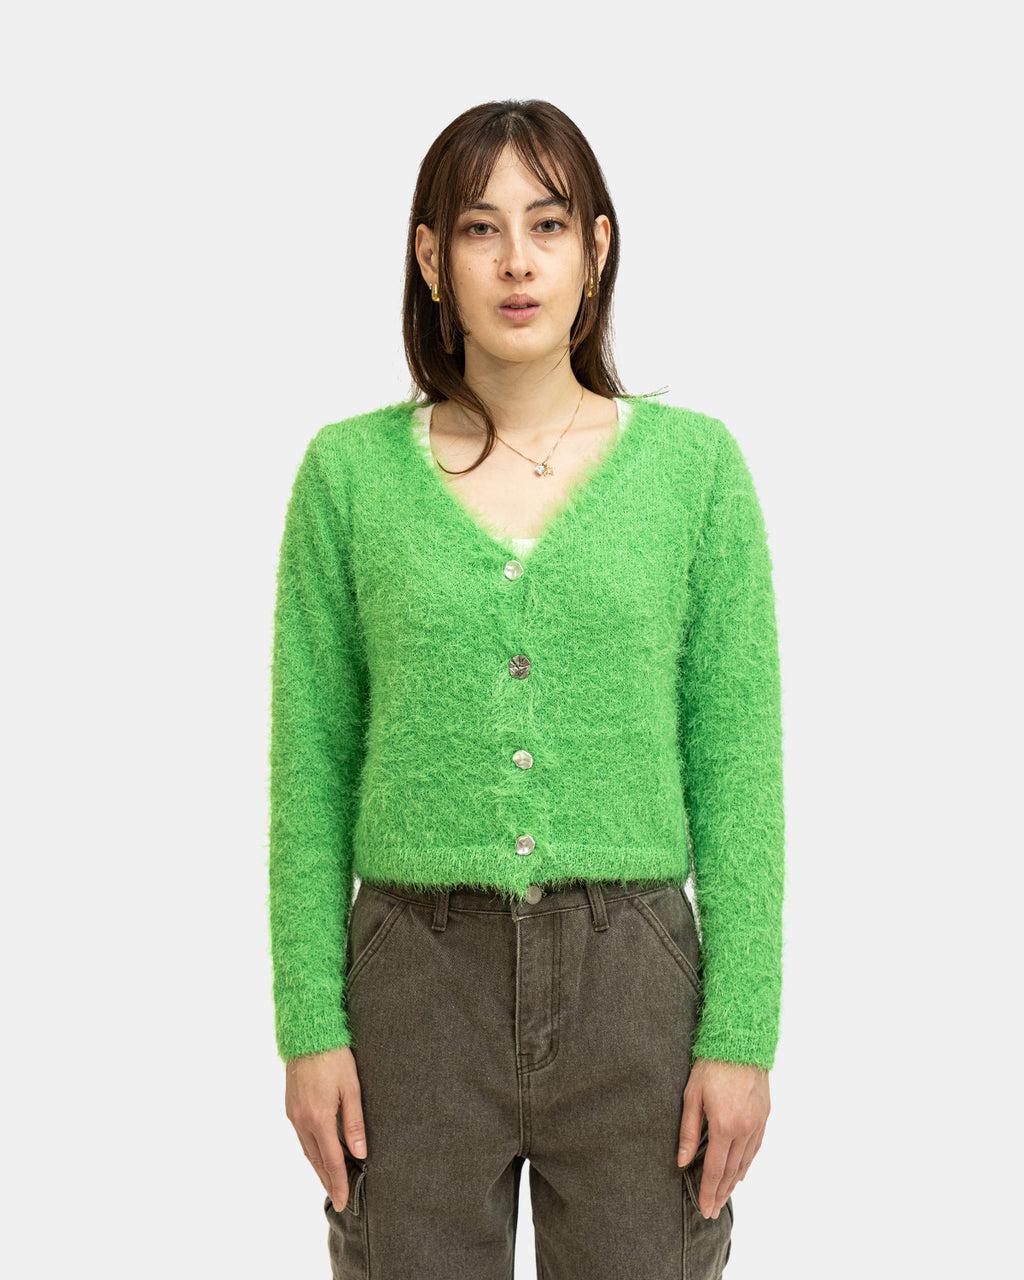 atmos Pink Colored Shaggy Knit Cardigan (Green)